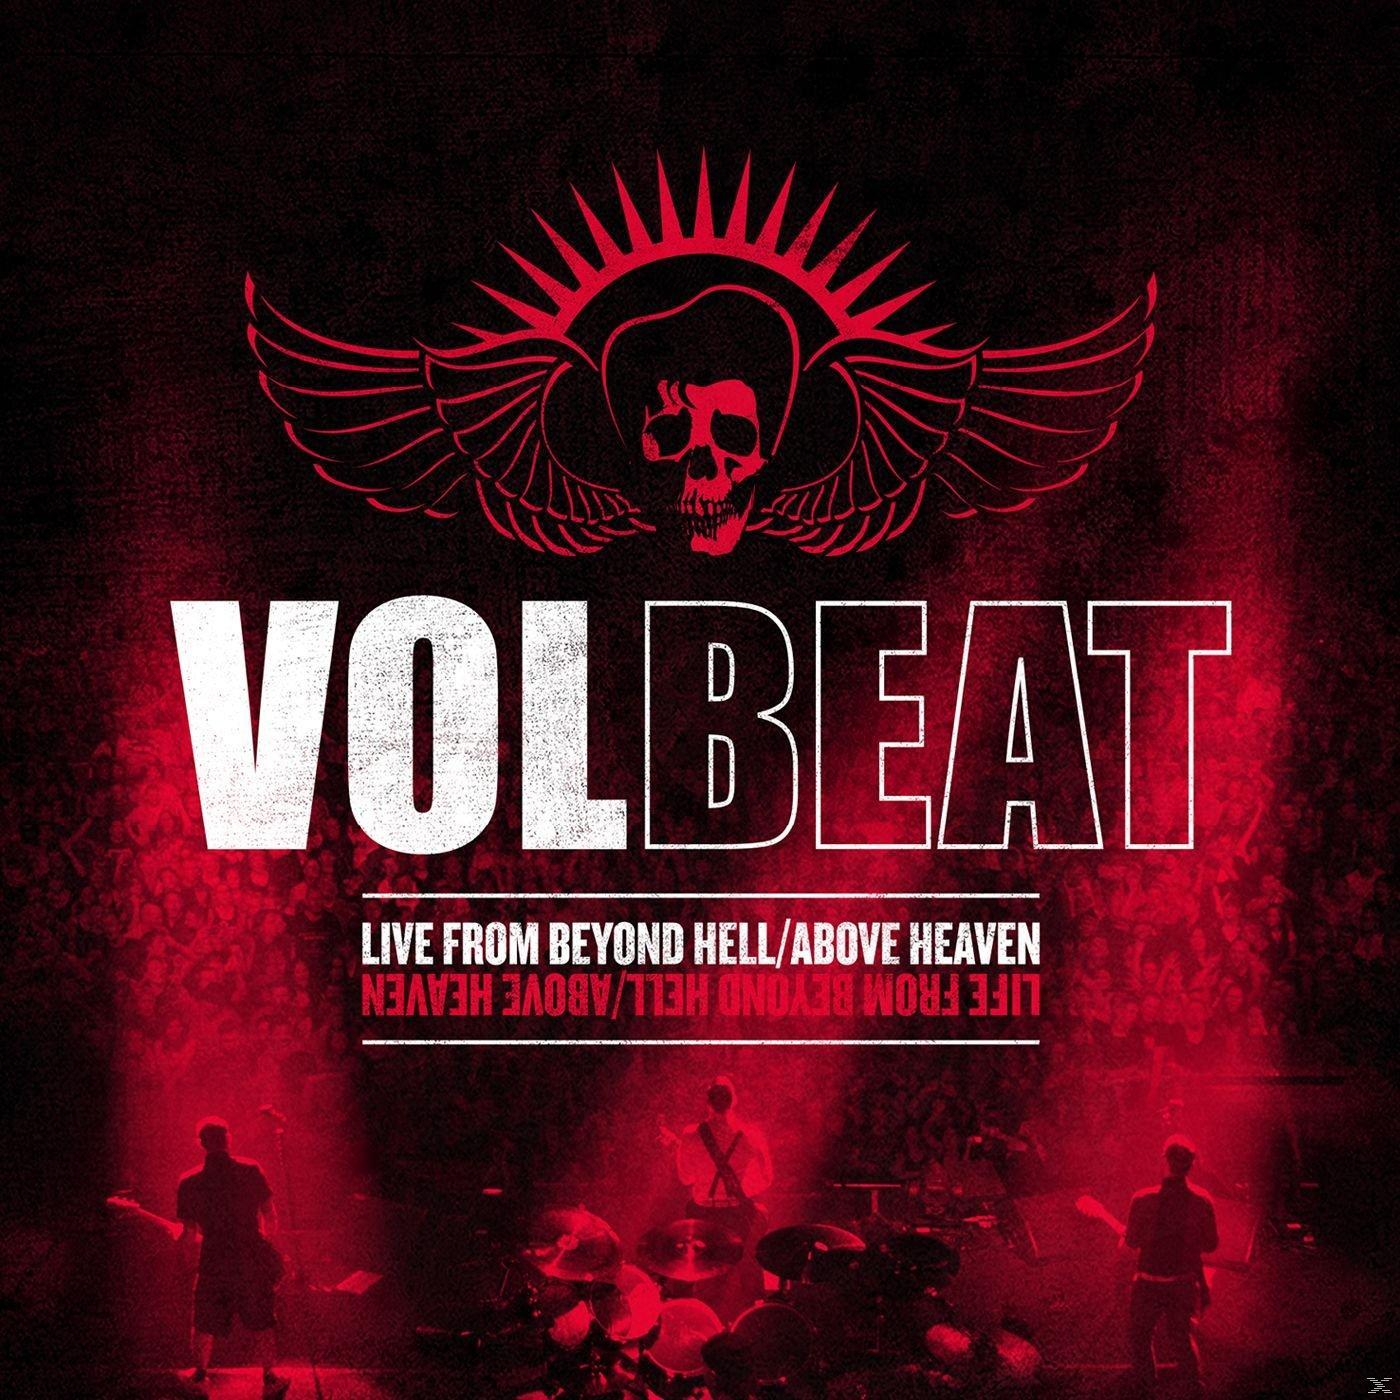 Hell/Above - Heaven Live From - (Vinyl) Beyond Volbeat